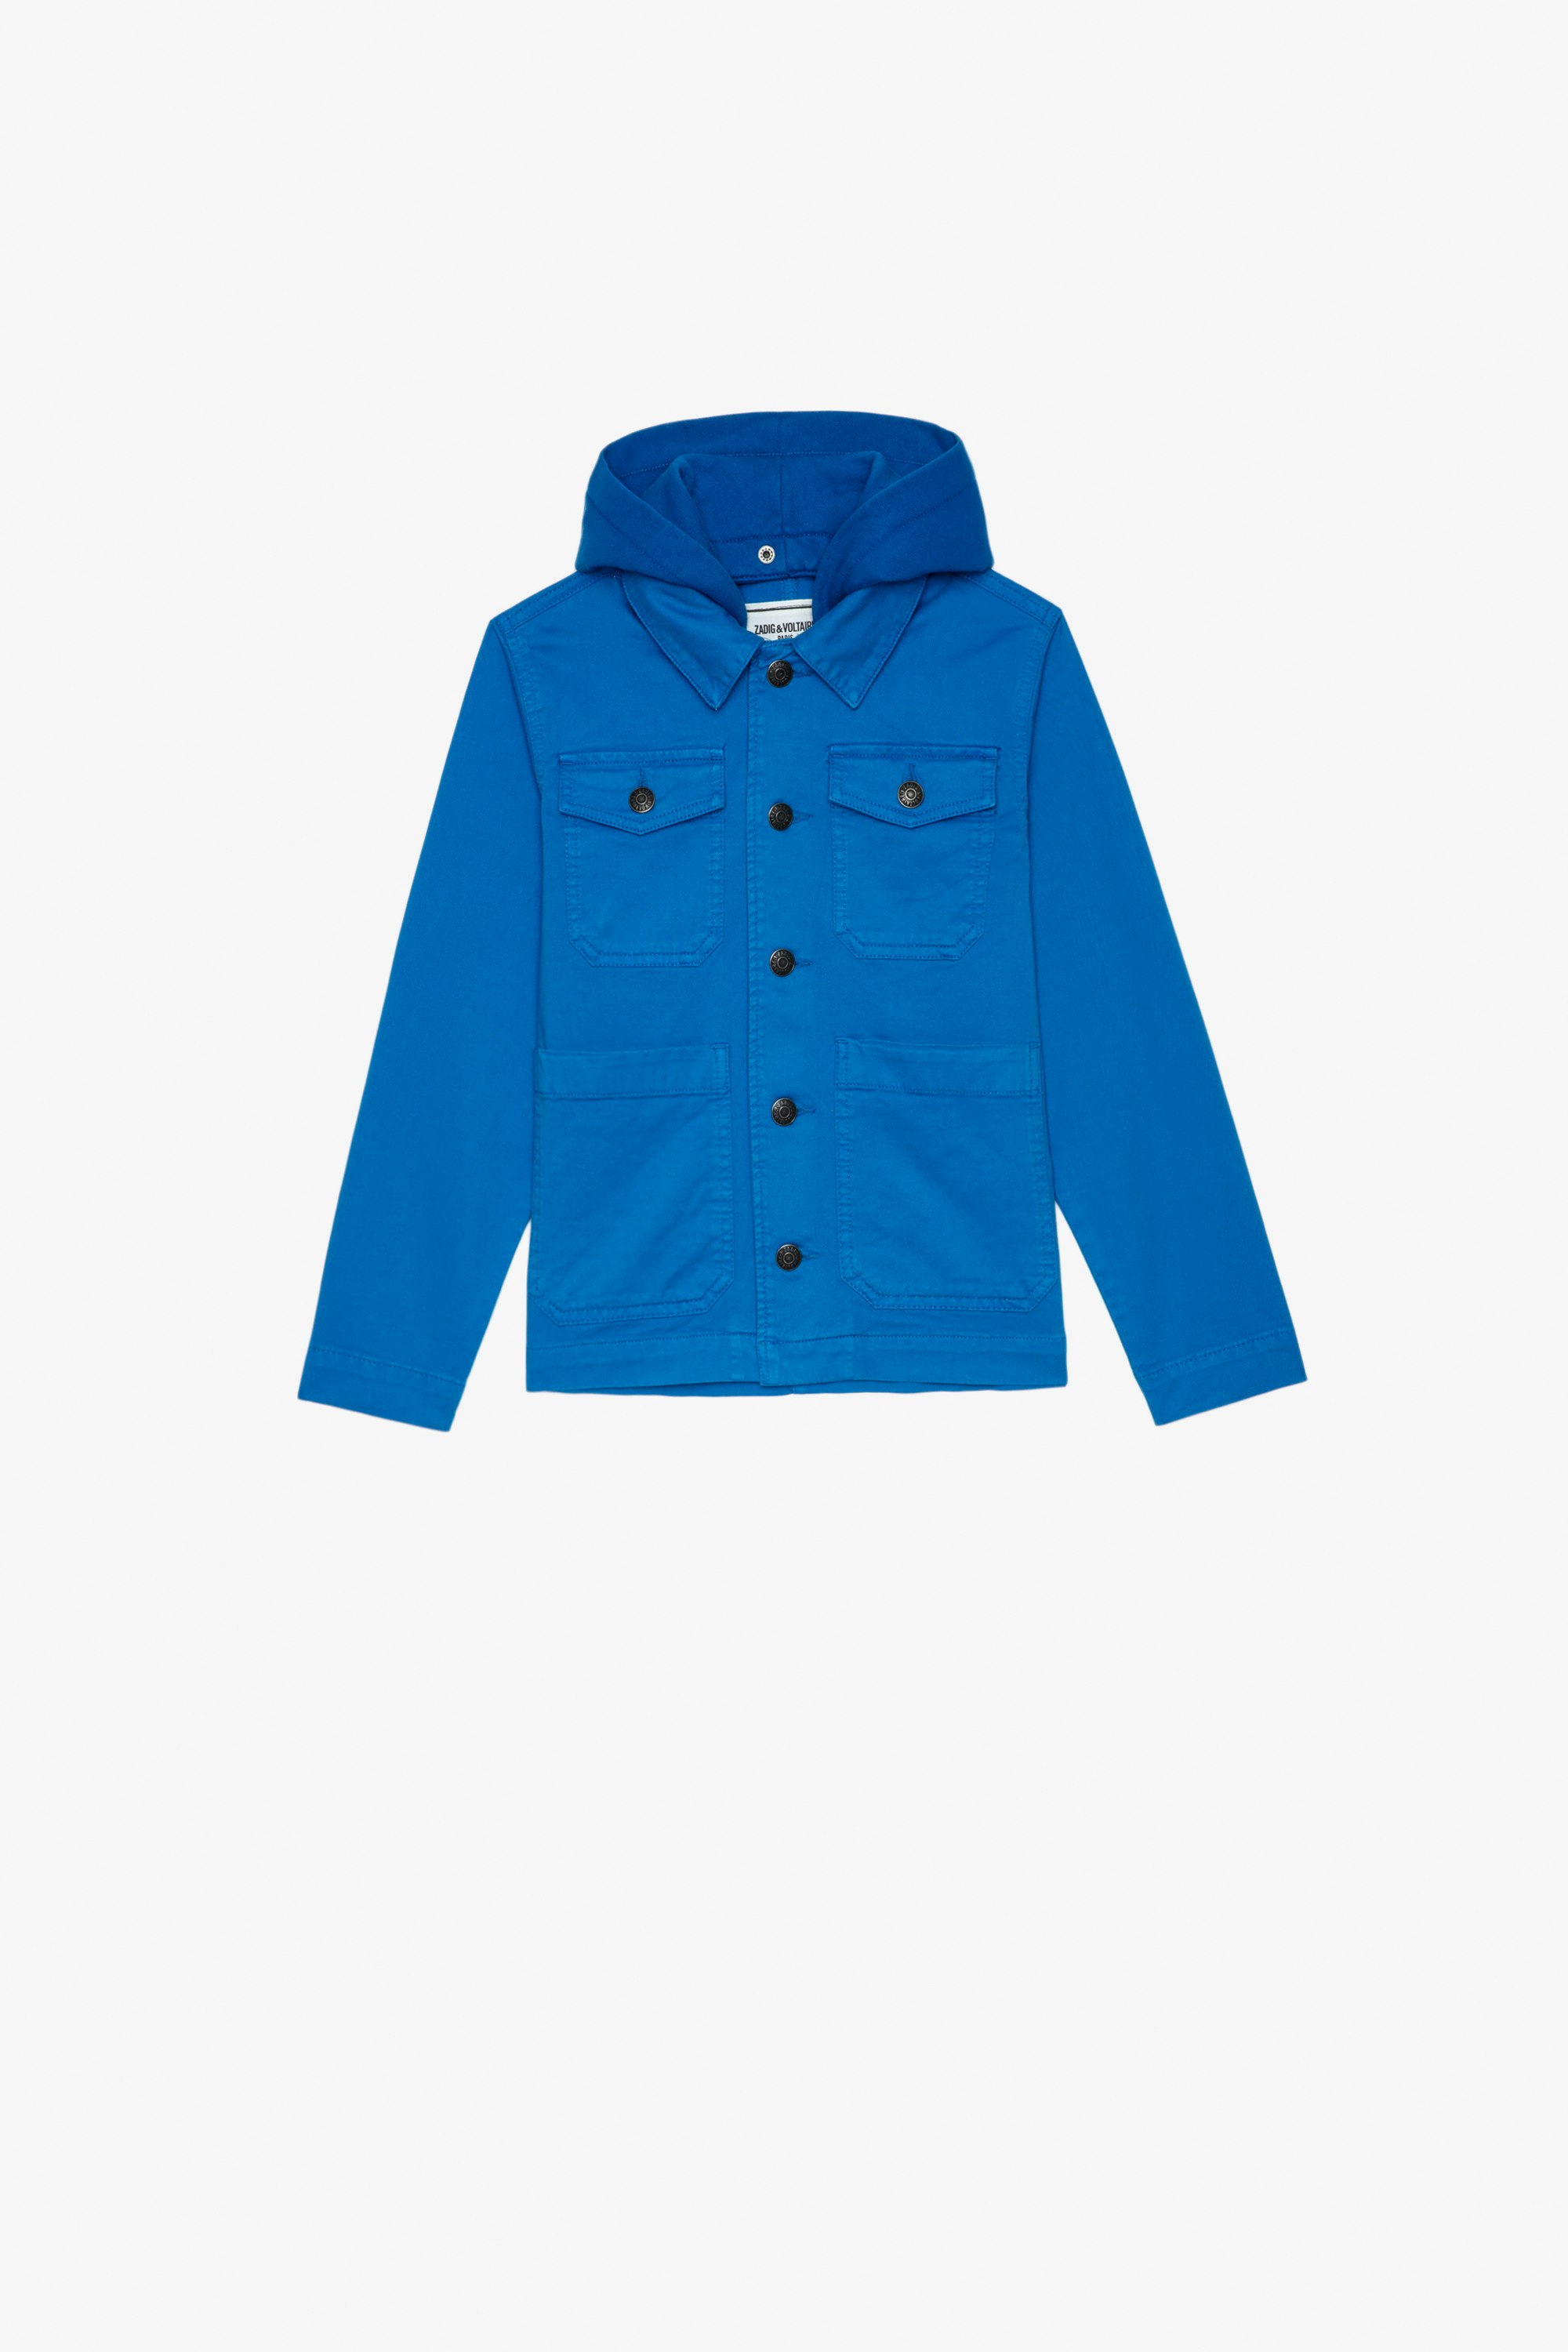 Bertie Kids' Jacket Kids’ blue cotton twill jacket with detachable hood and “Art lover” slogan on the back